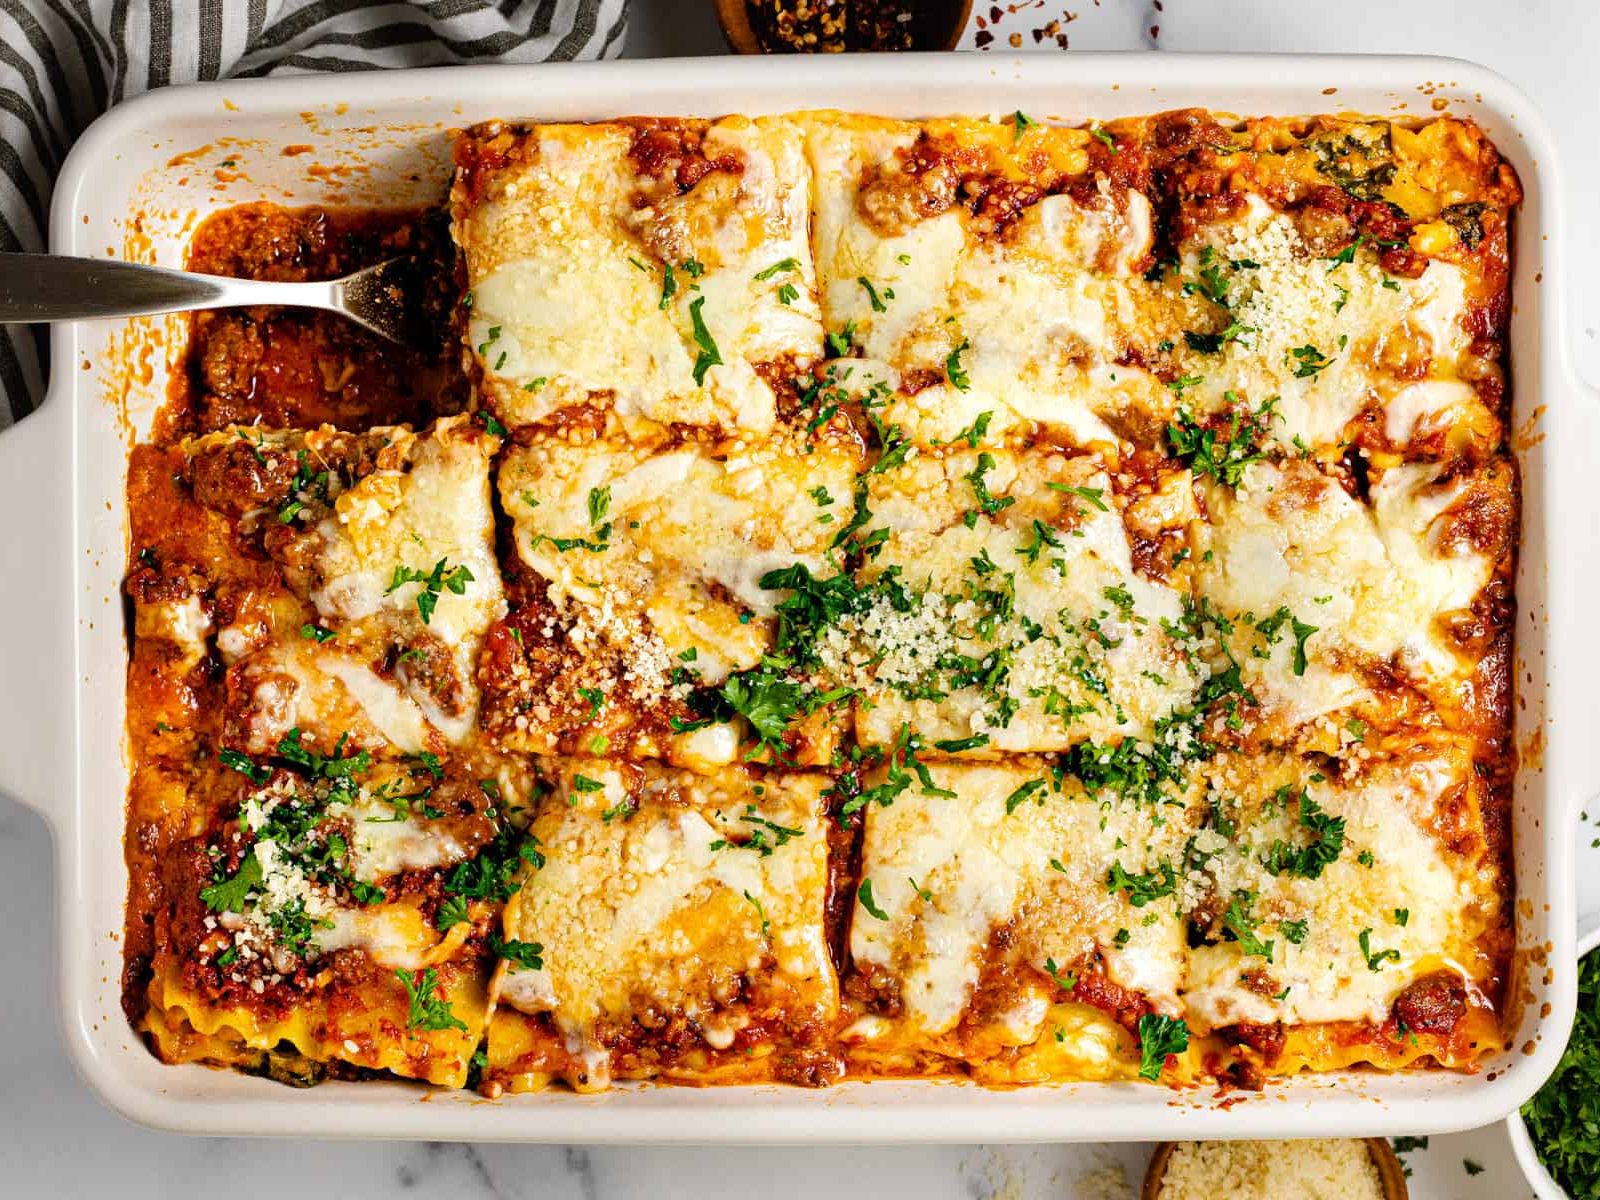 Cottage Cheese Recipes, Lasagna, Courtesy of Midwest Foodie